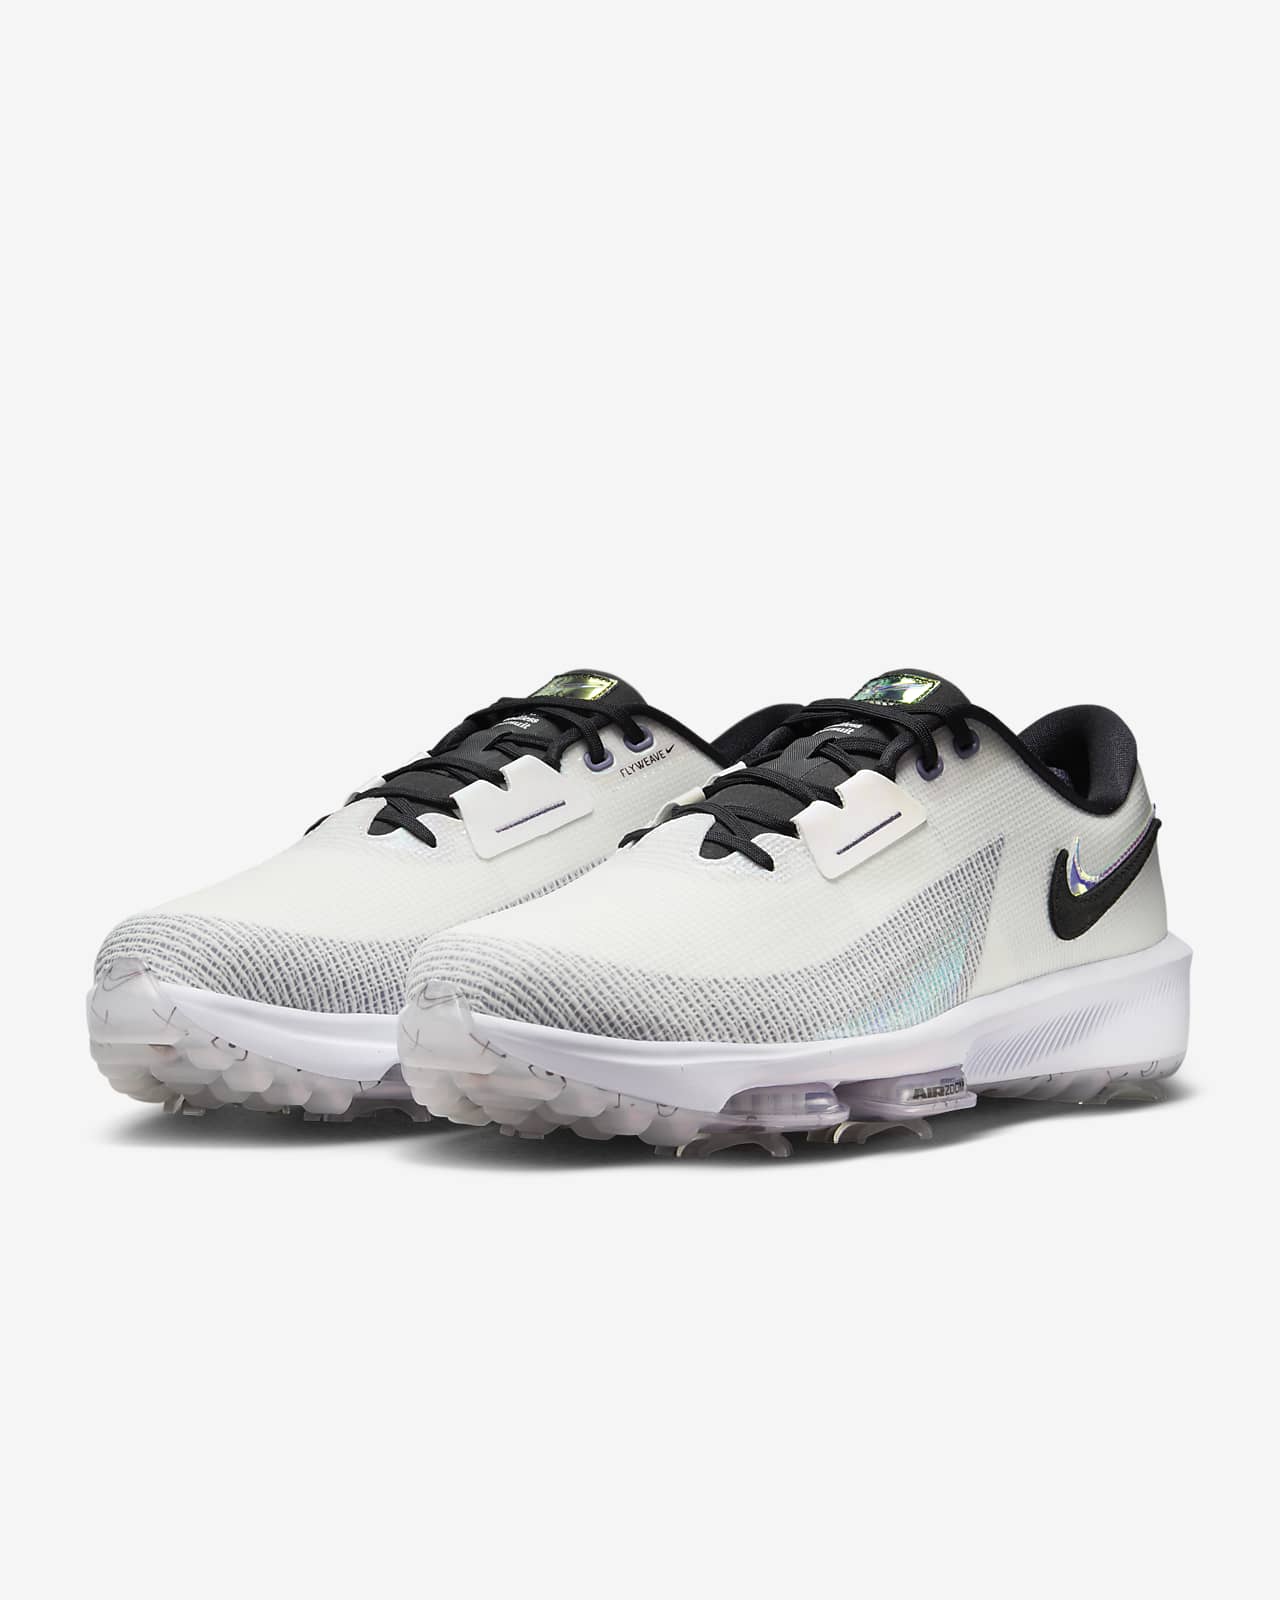 Nike Air Zoom Infinity Tour NRG Golf Shoes (Wide)